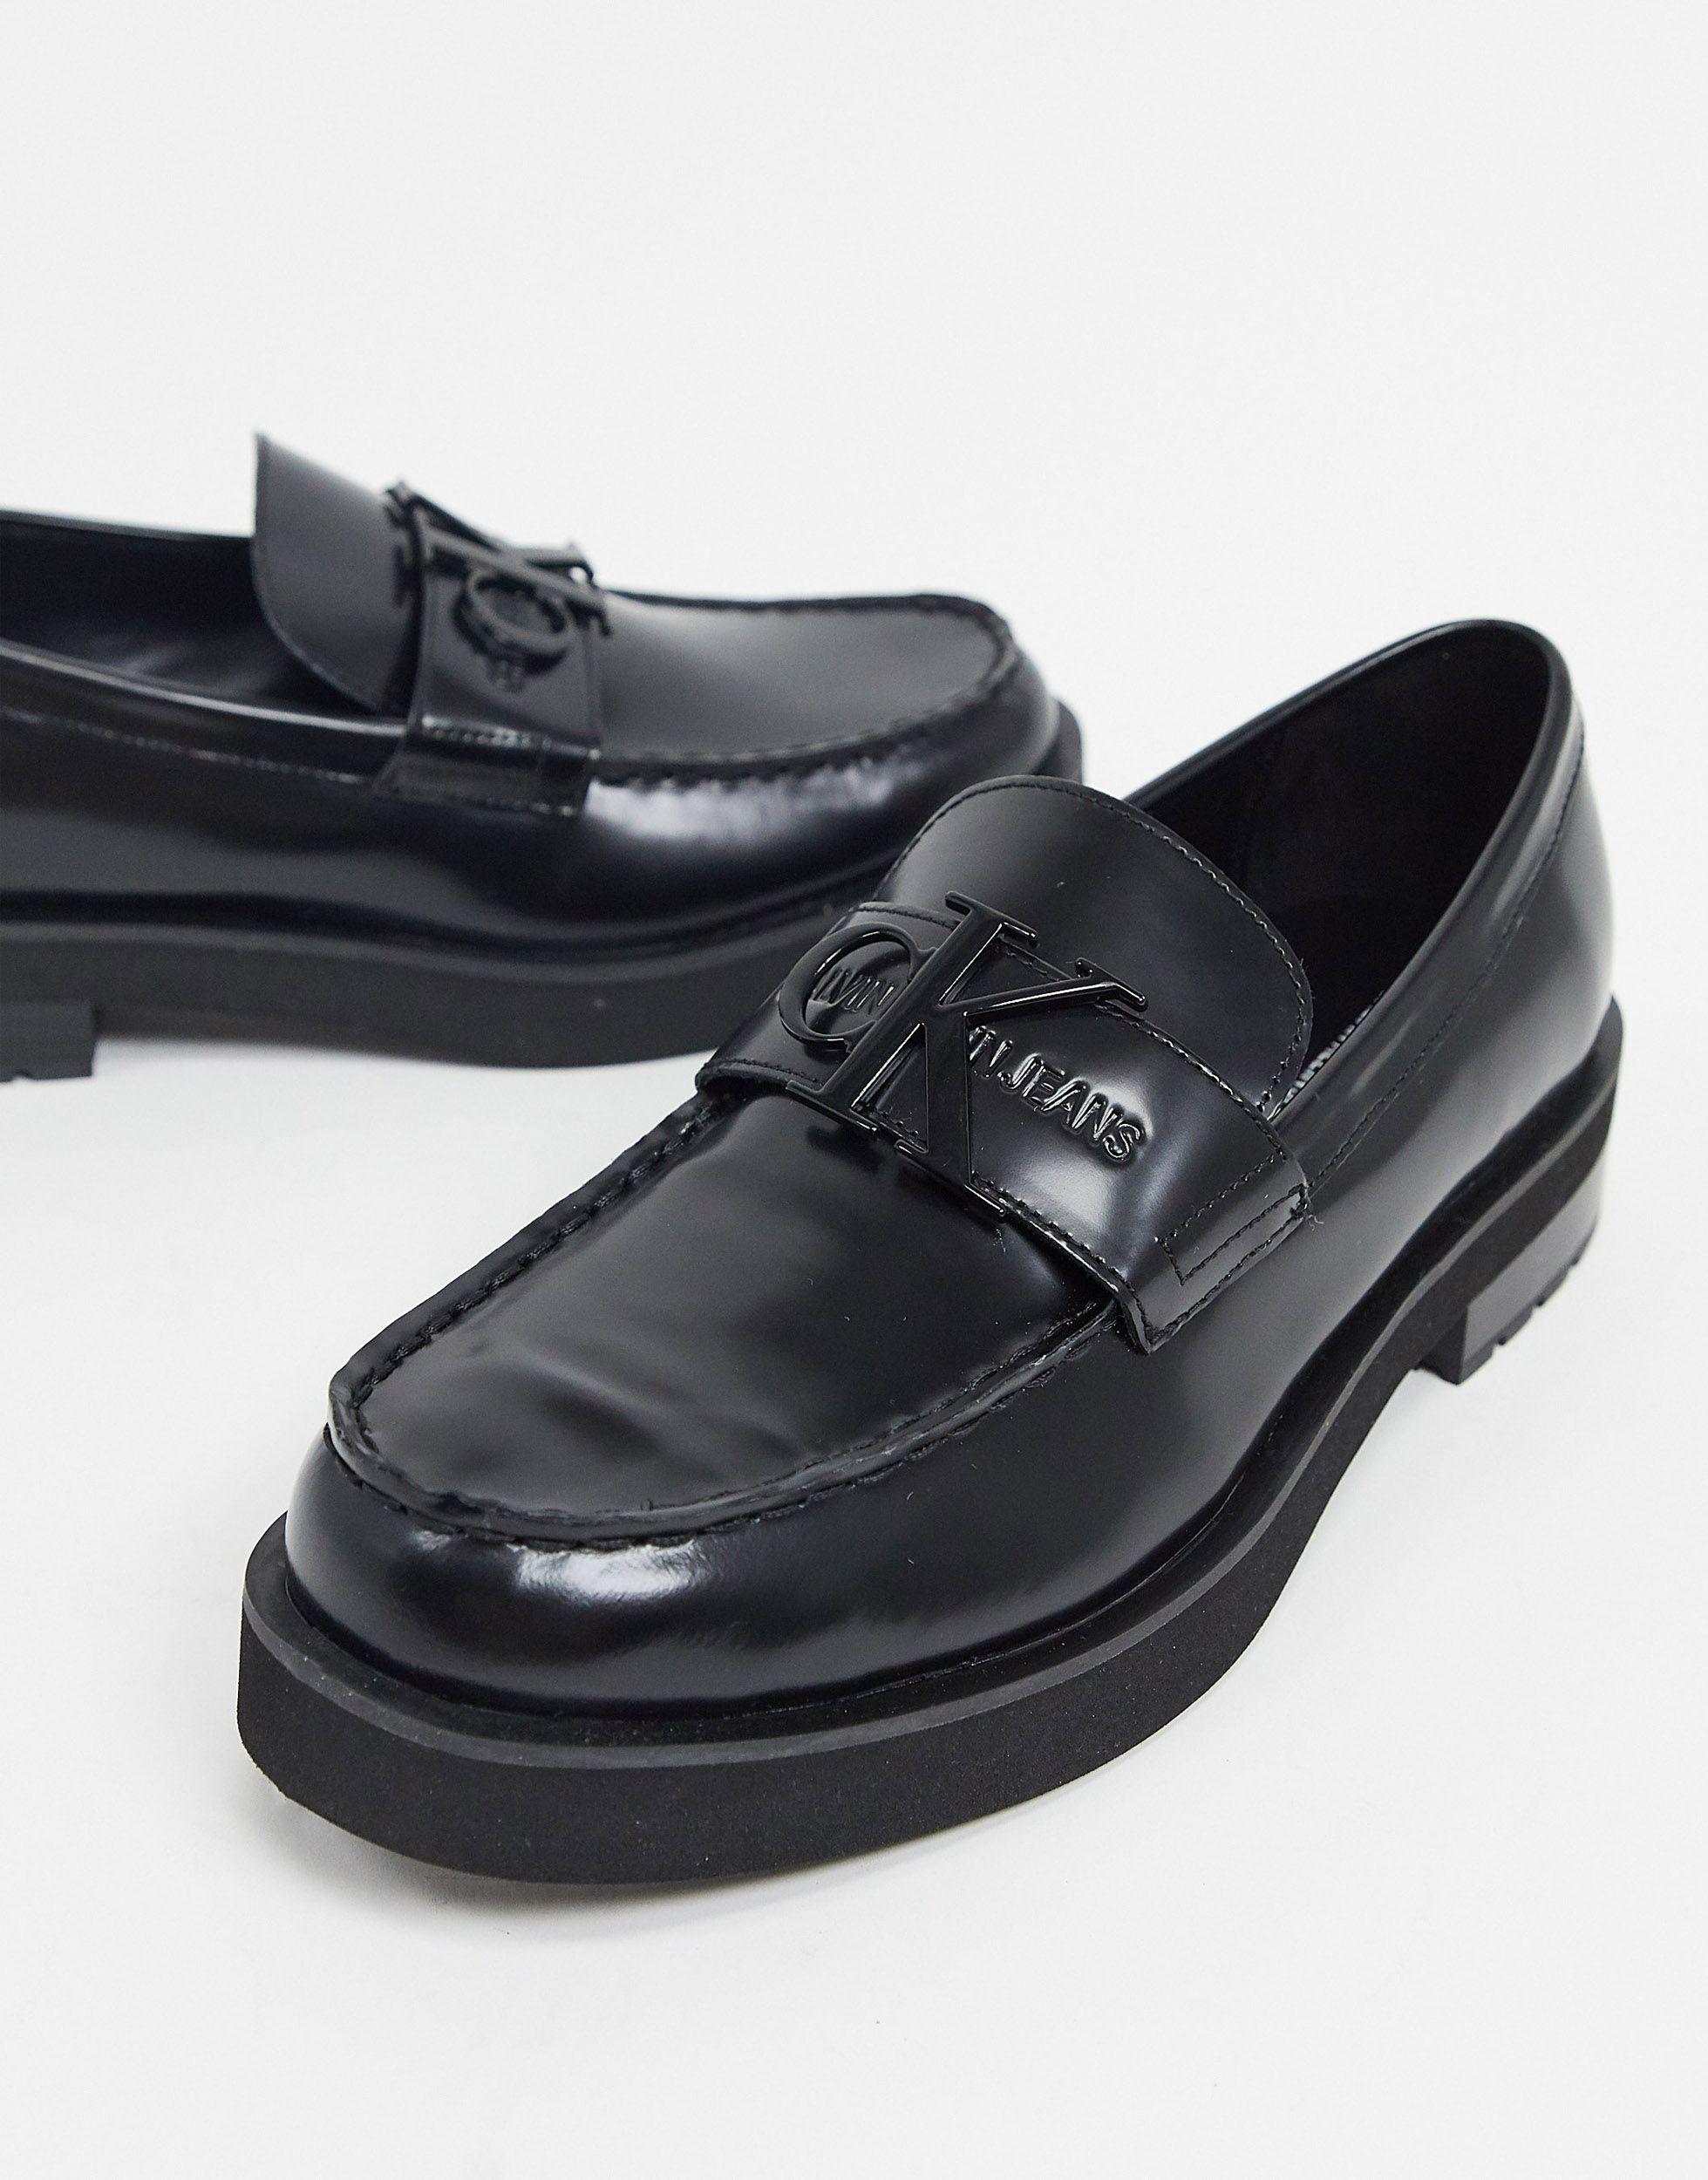 Calvin Klein Leather Novic Chunky Loafers in Black for Men - Lyst